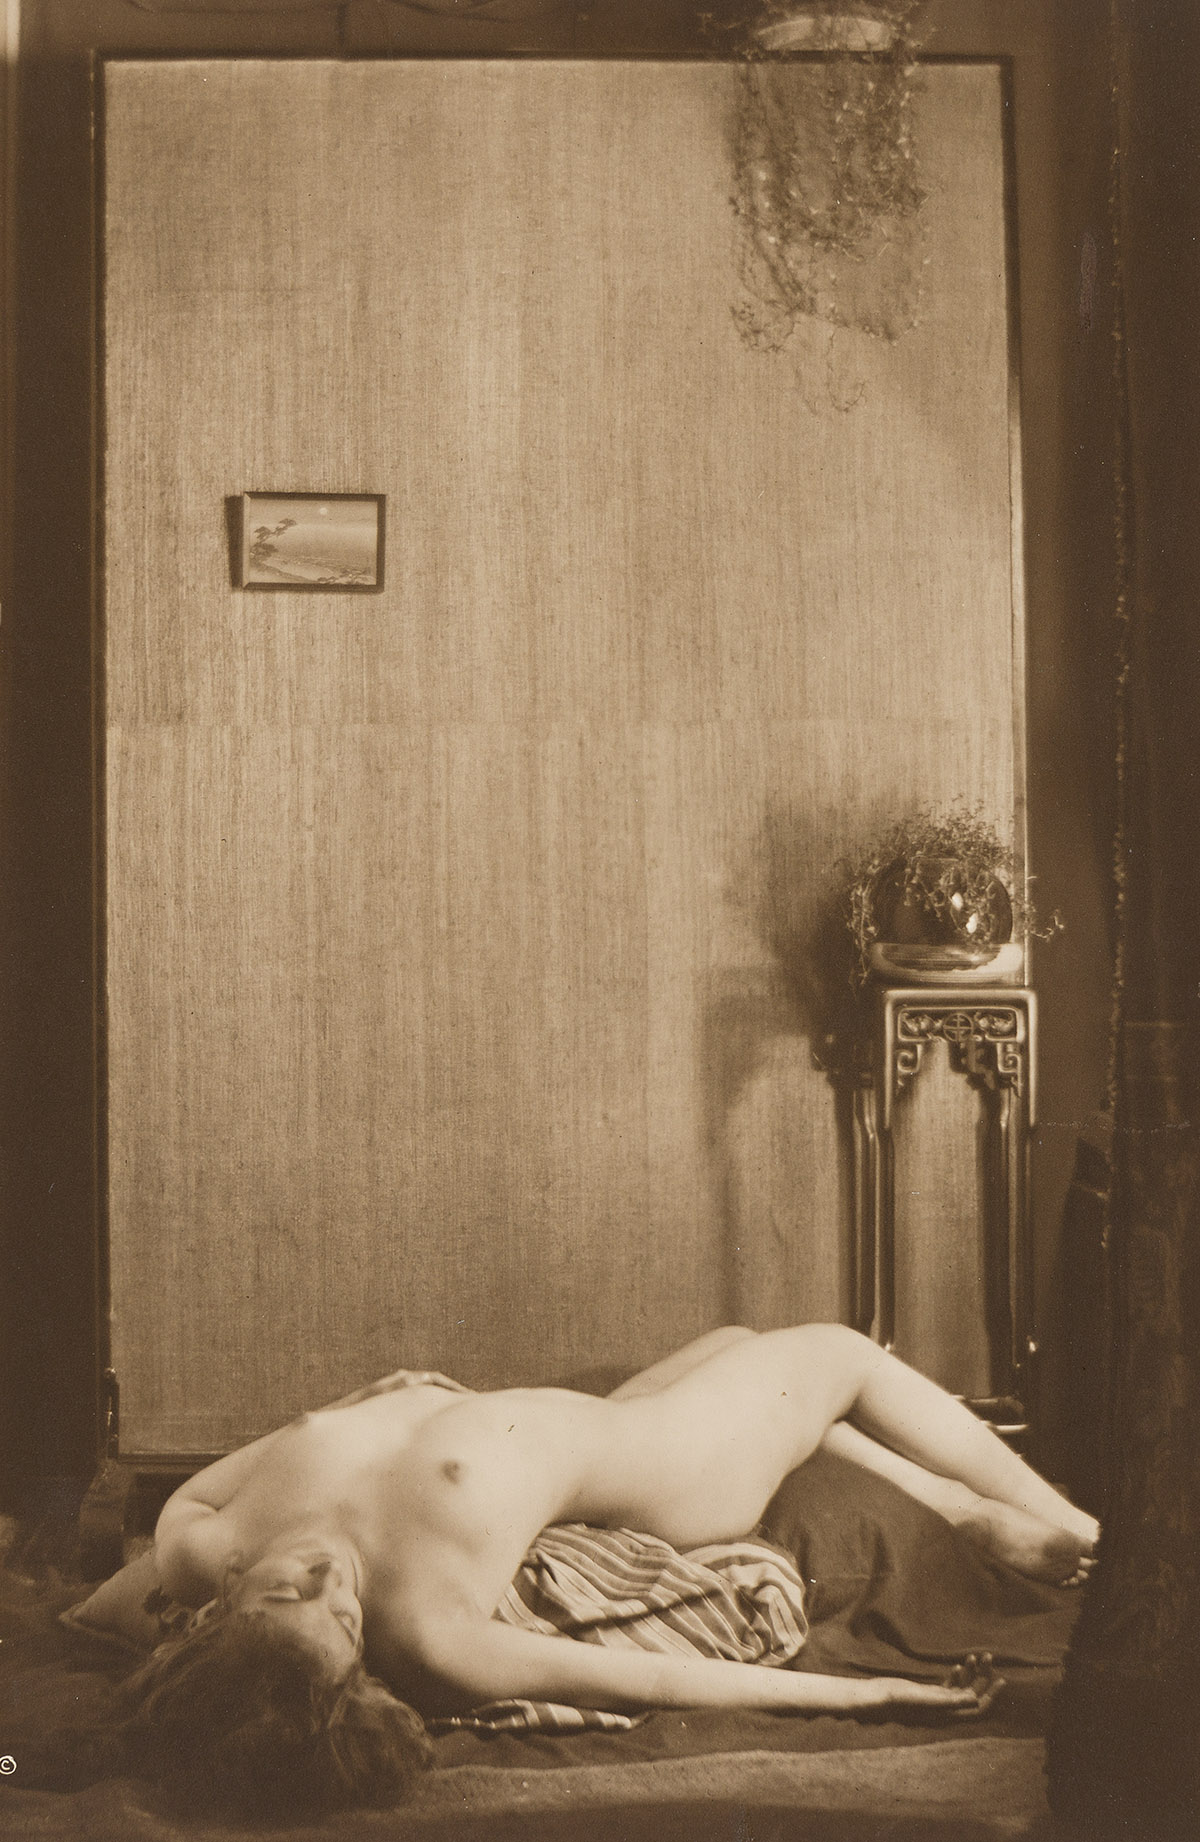 KARL STRUSS (1886-1981) Untitled, from The Female Figure, First Series.